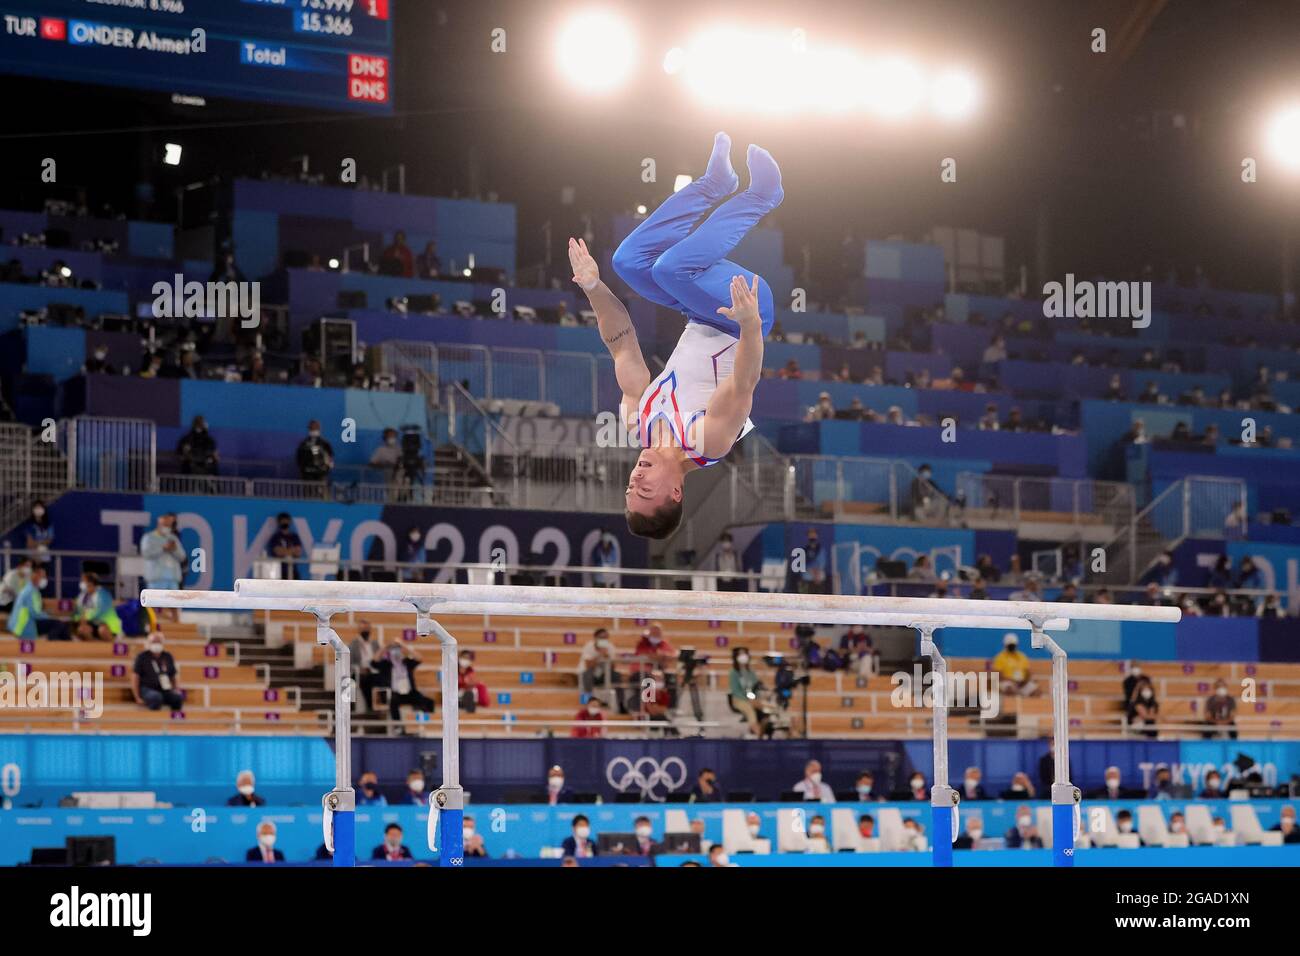 Tokyo, Japan, 28 July, 2021. Nikita Nagornyy of Team ROC on the parallel bars during the Men's All Around Gymnastics Final on Day 5 of the Tokyo 2020 Olympic Games at Ariake Gymnastics Centre on July 28, 2021 in Tokyo, Japan. (Photo by Pete Dovgan/Speed Media/Alamy Live News) Stock Photo